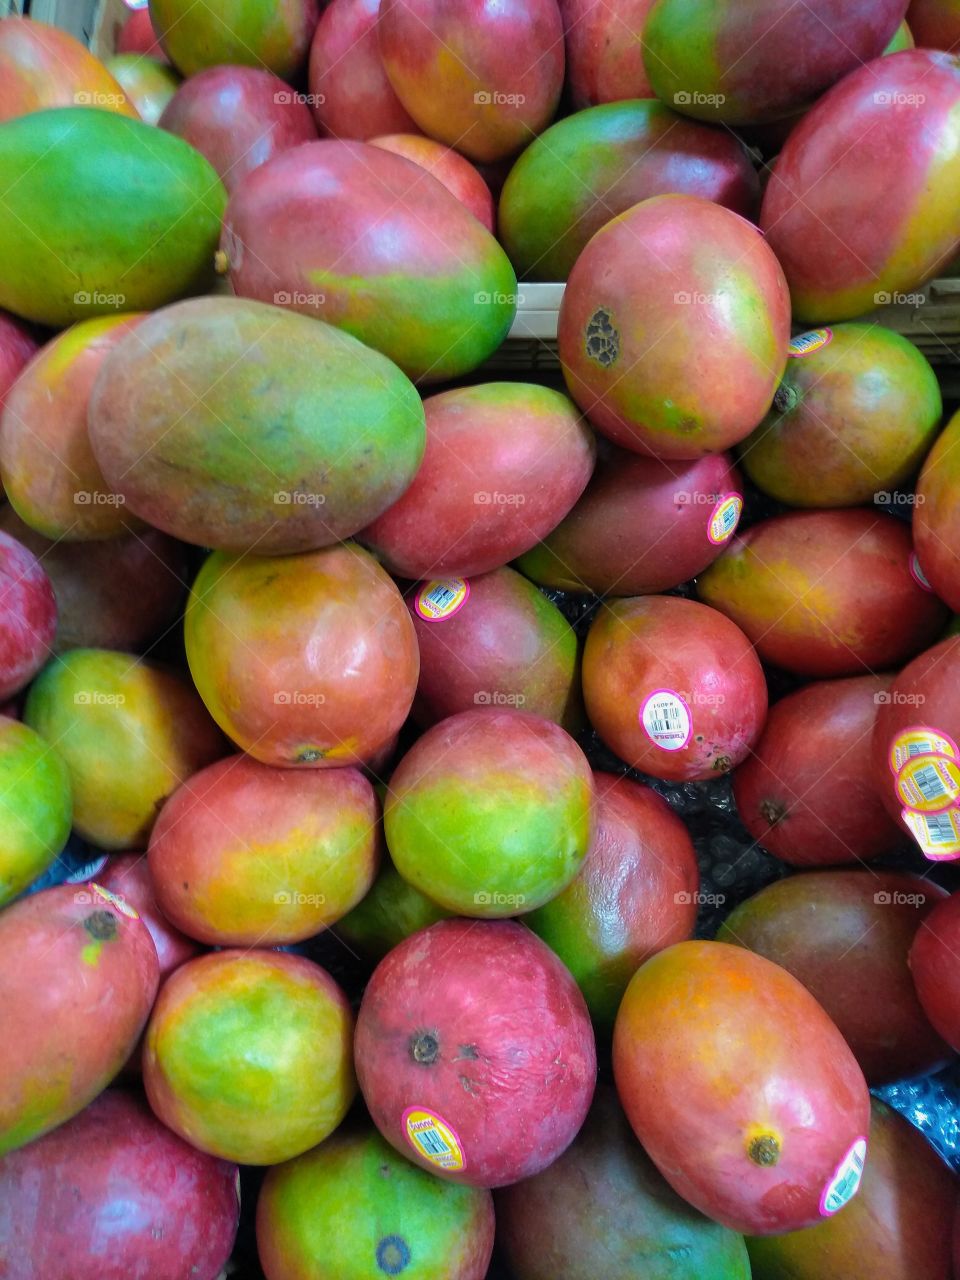 look at all that fruit -mangos